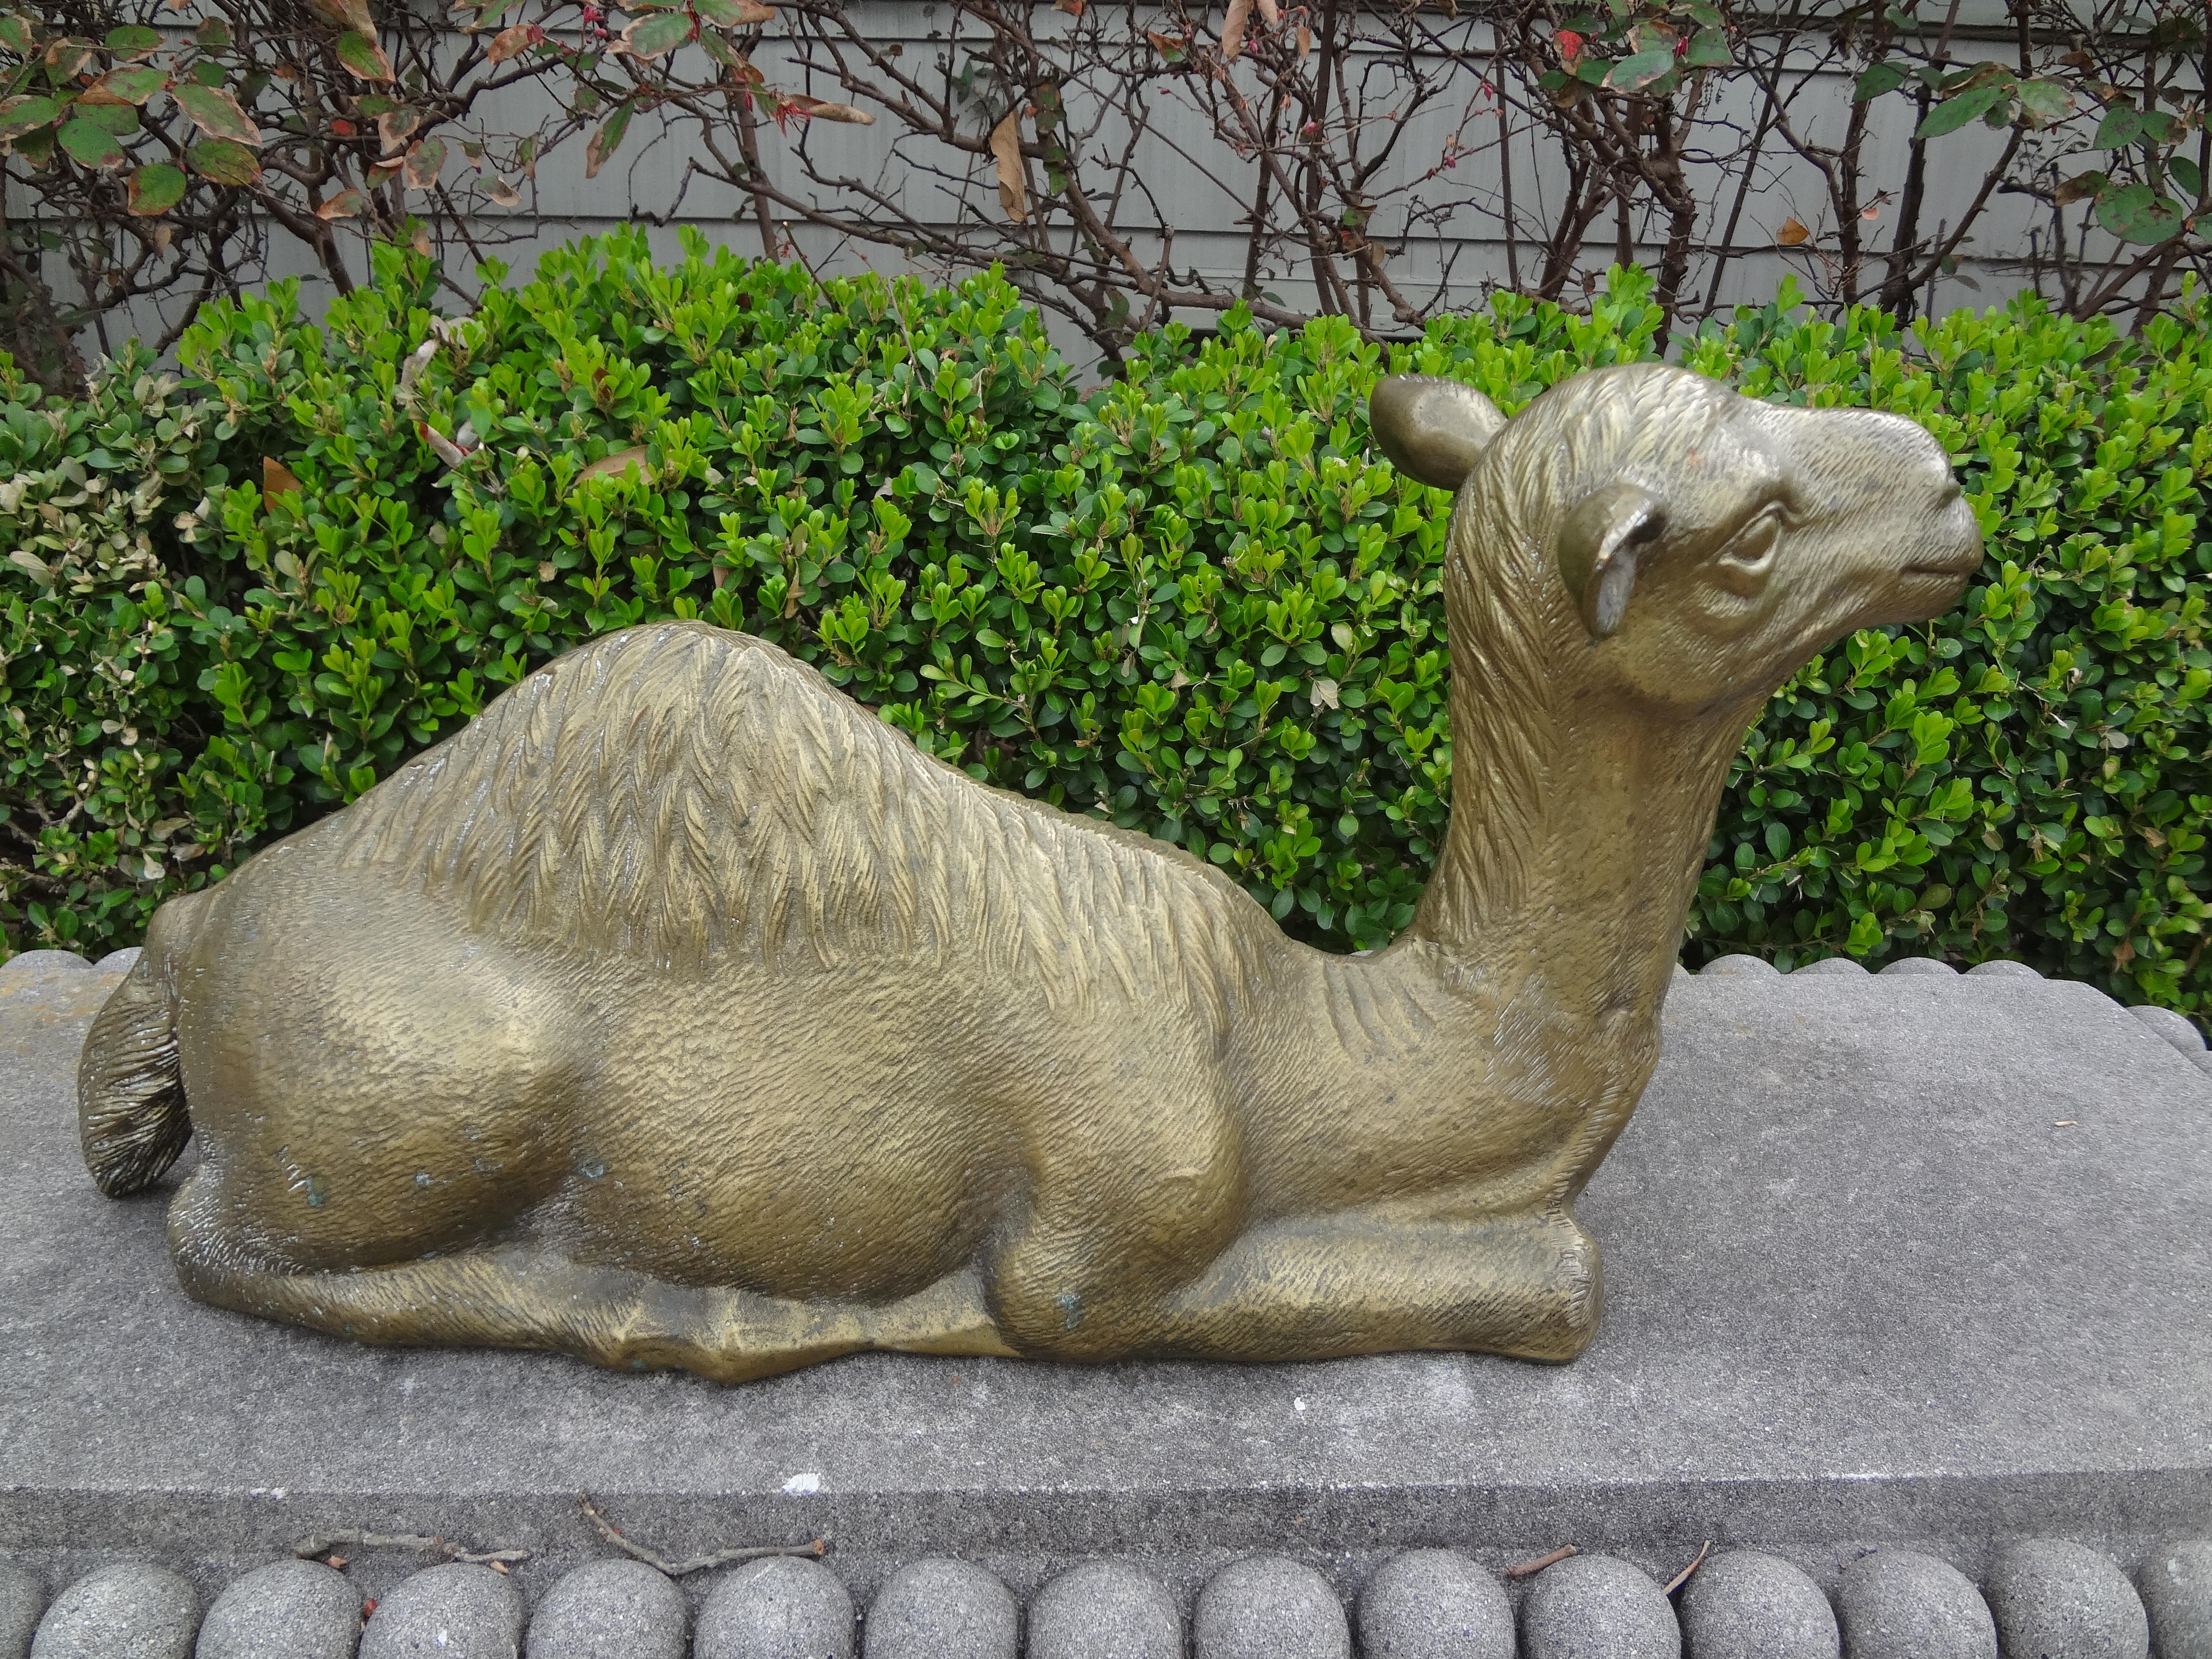 Hollywood Regency brass camel statue.
Unusual large well detailed Hollywood Regency brass camel statue. Our lovely vintage brass camel figure or camel sculpture is executed in a reposed position. A great decorative accessory!